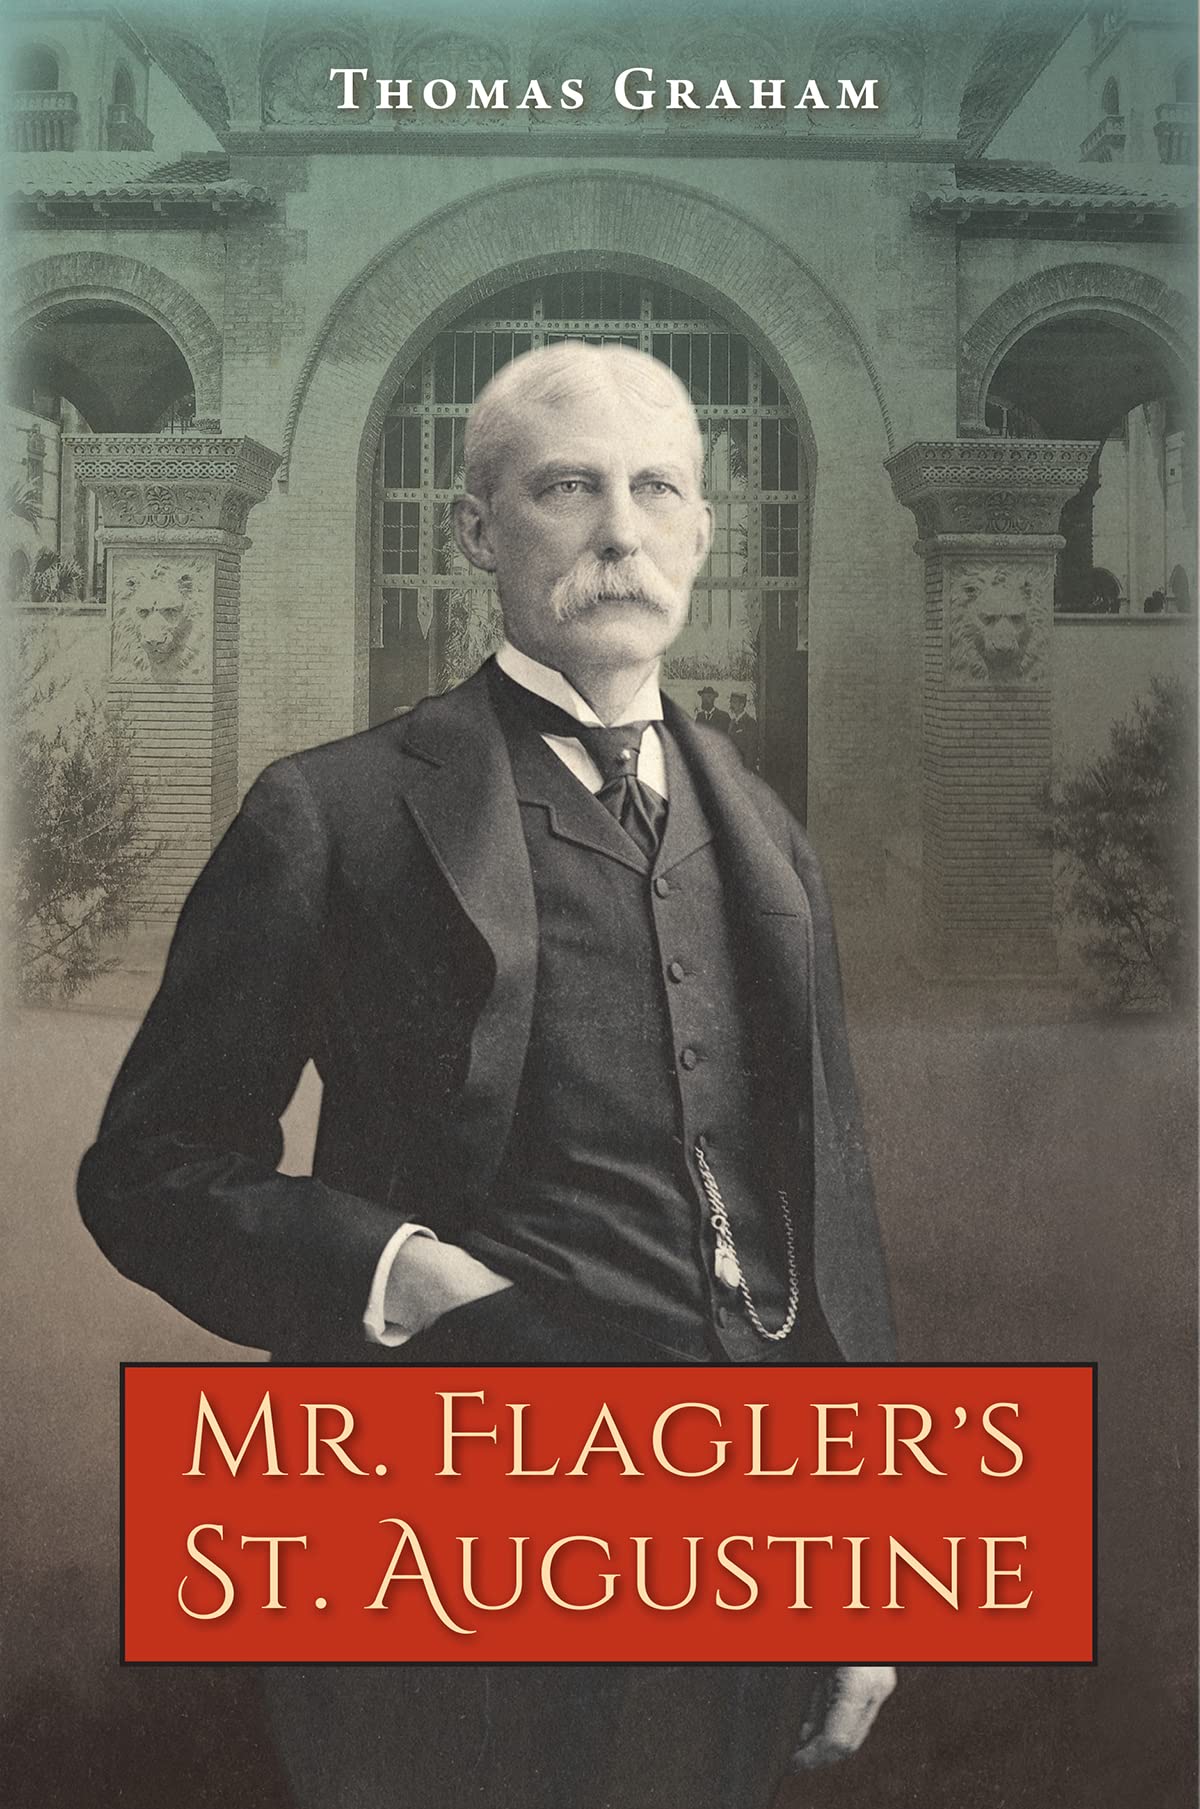 Cover of book depicting Henry Flagler at the Ponce de Leon Hotel